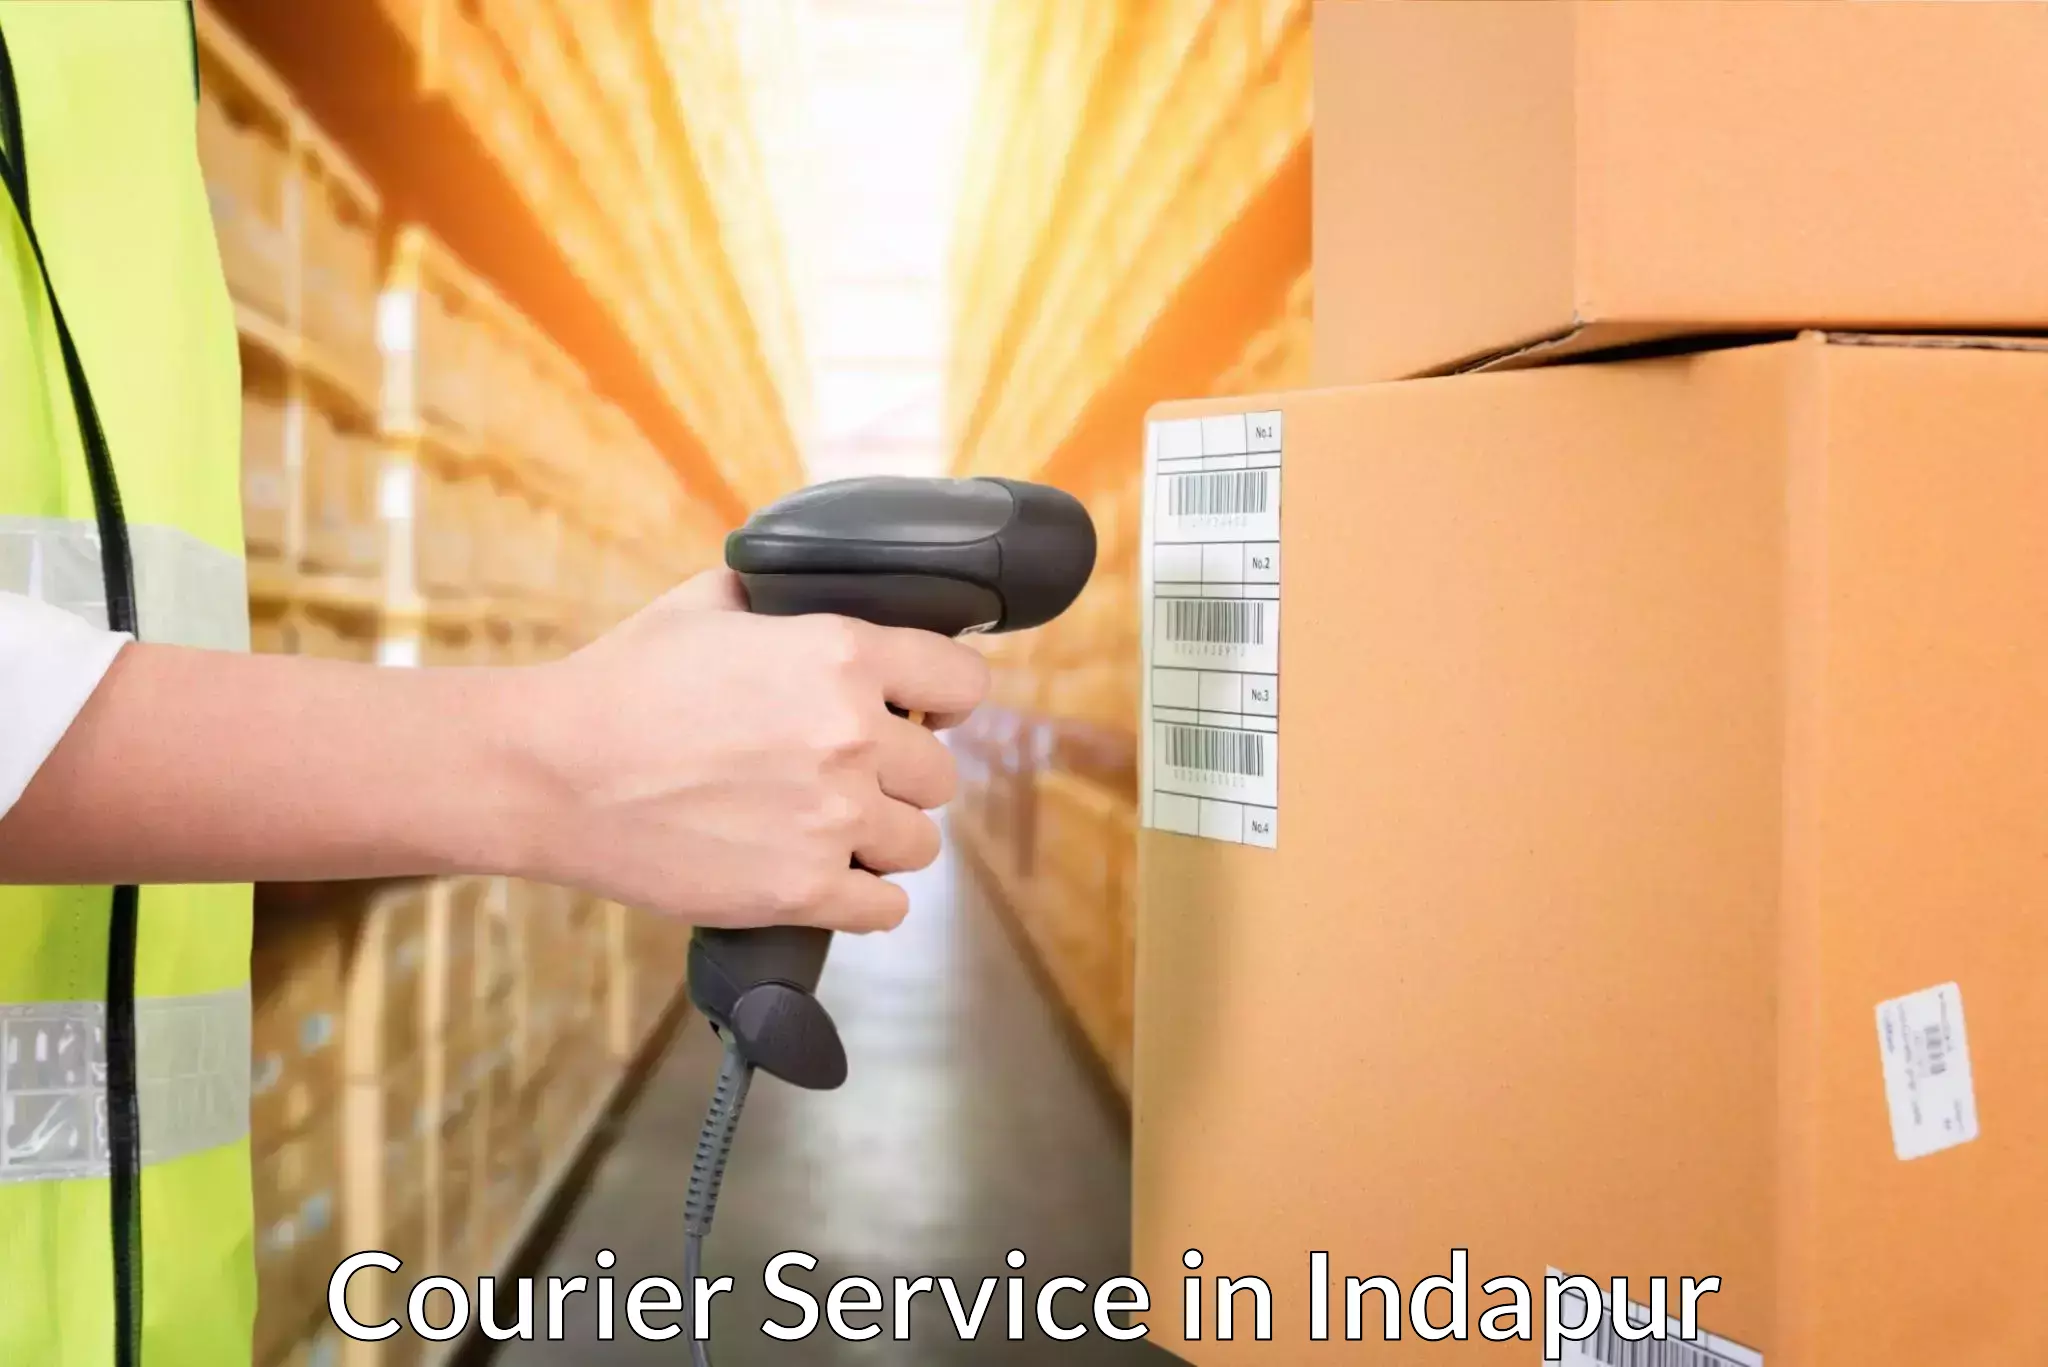 Return courier service in Indapur